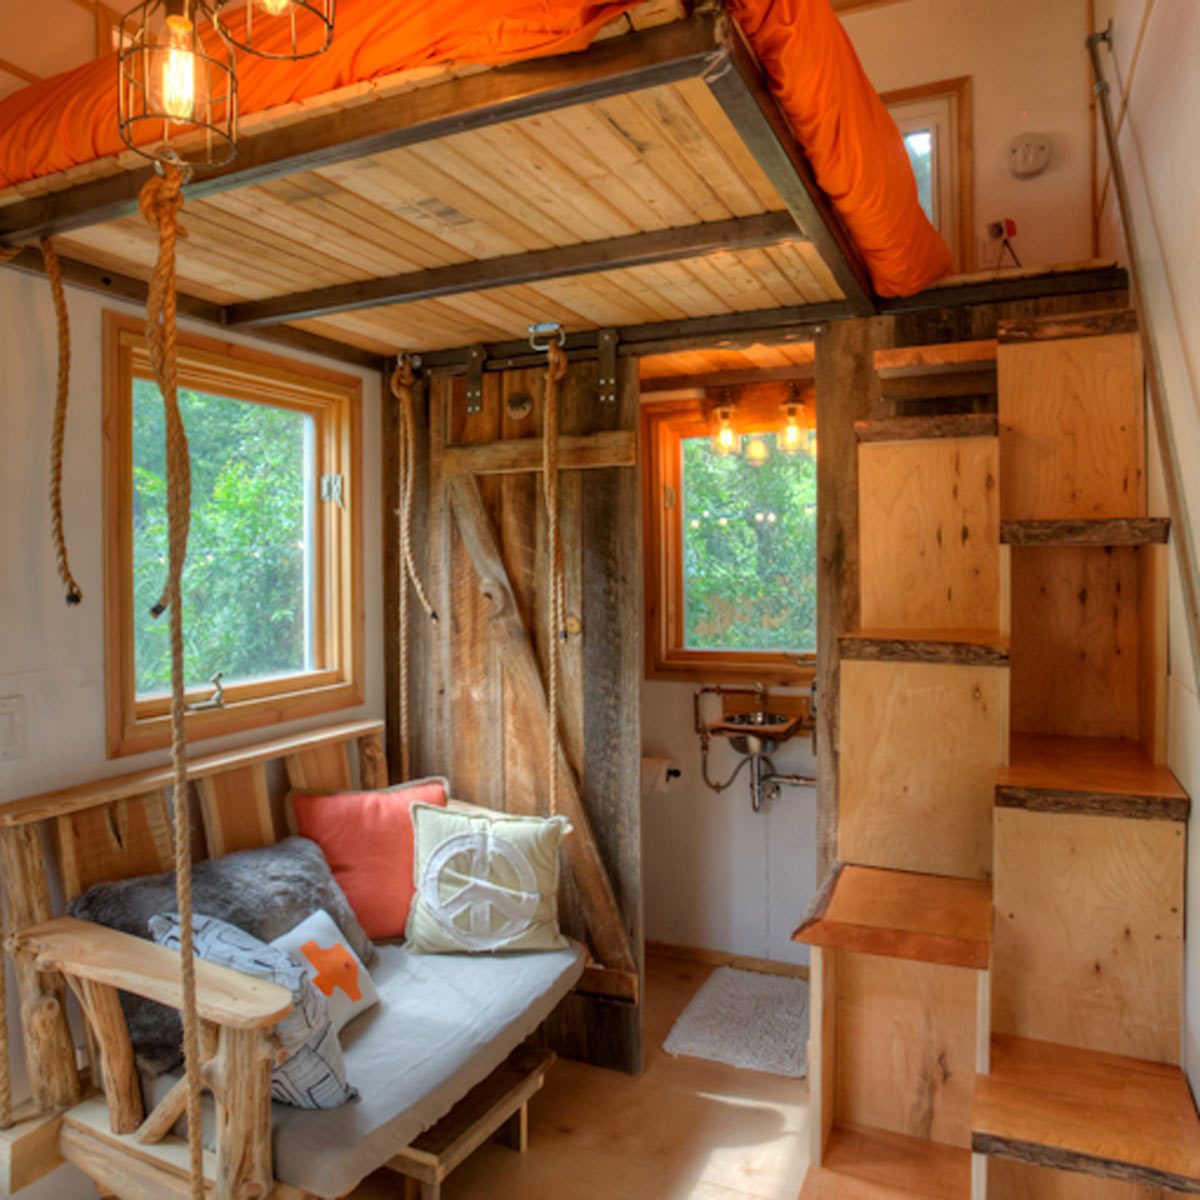 Living large while going small: The best luxury tiny houses on the market  right now